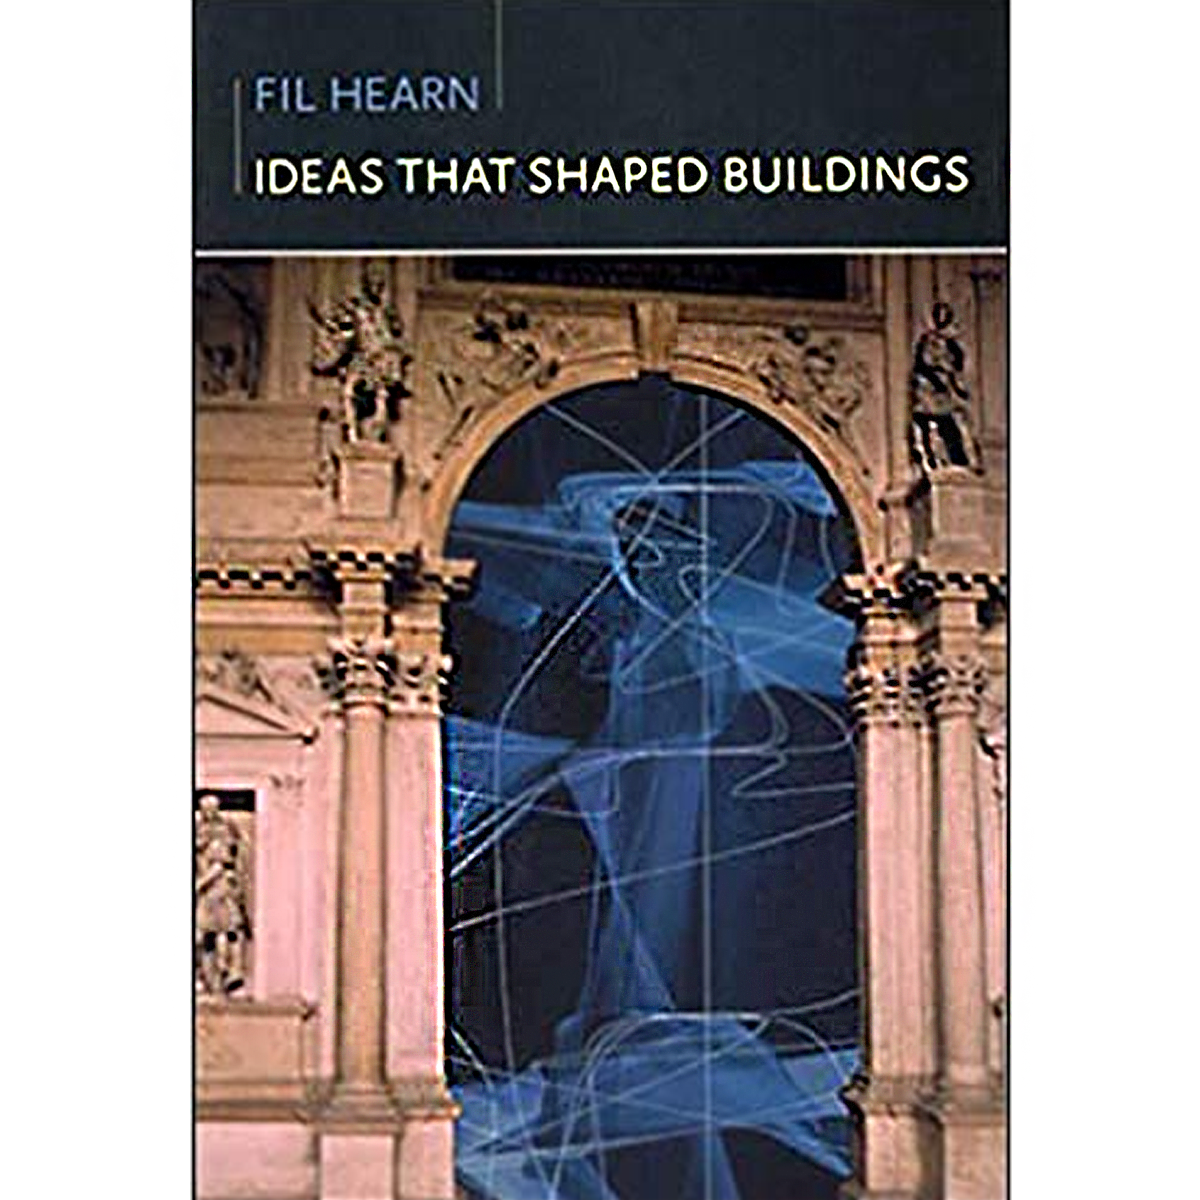 Ideas that Shaped Buildings